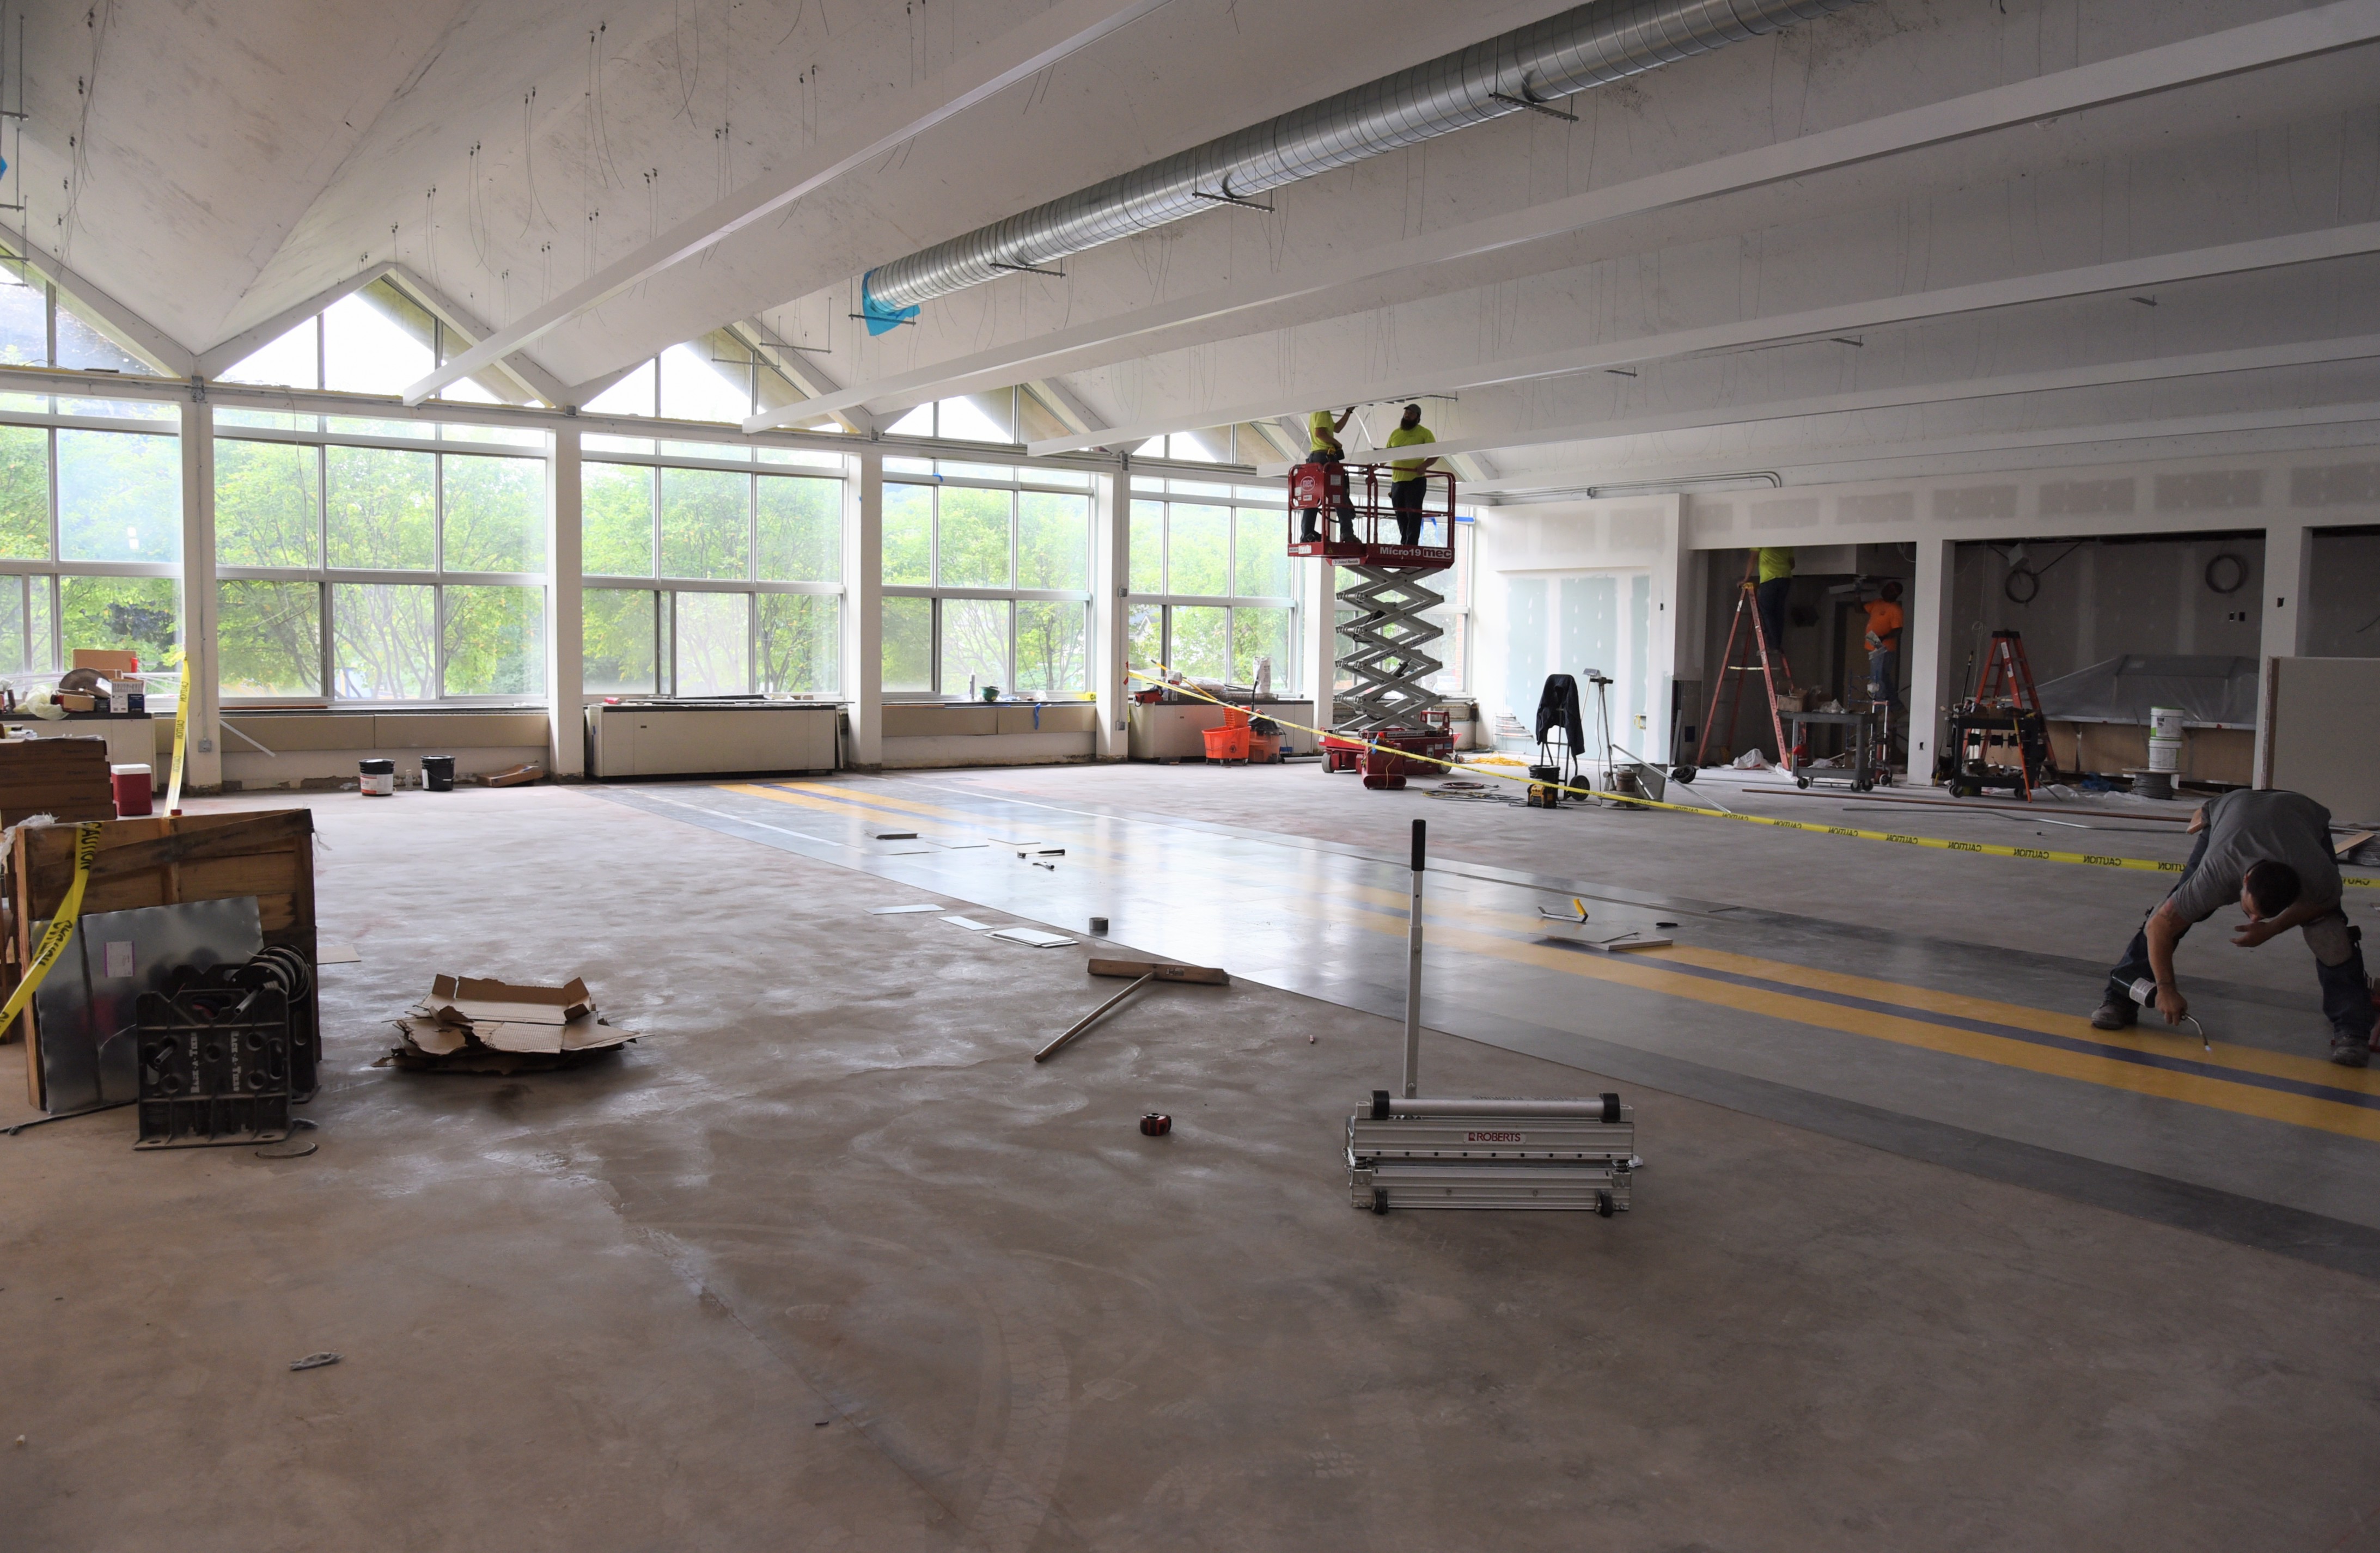 Dining Center during construction (shot from left)